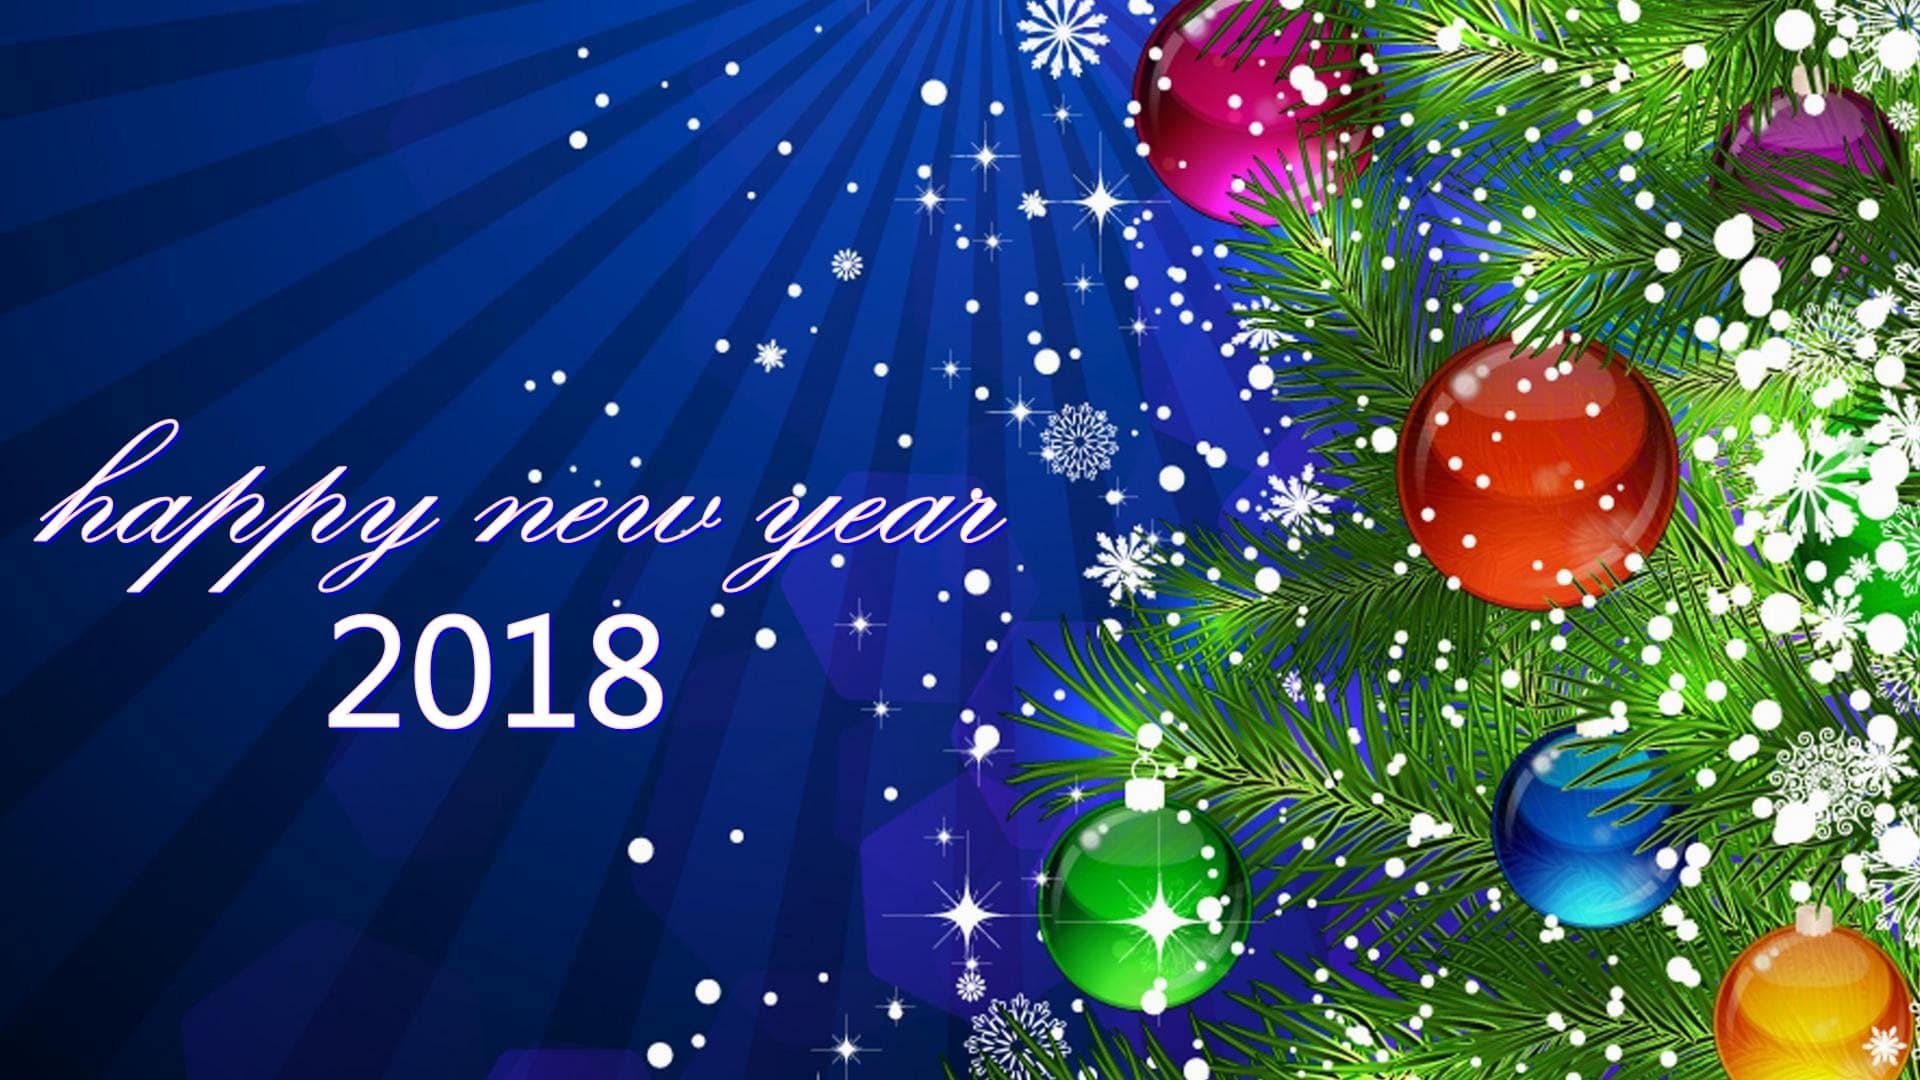 Happy New Year 2018 Decoration diy outdoor christmas decorations